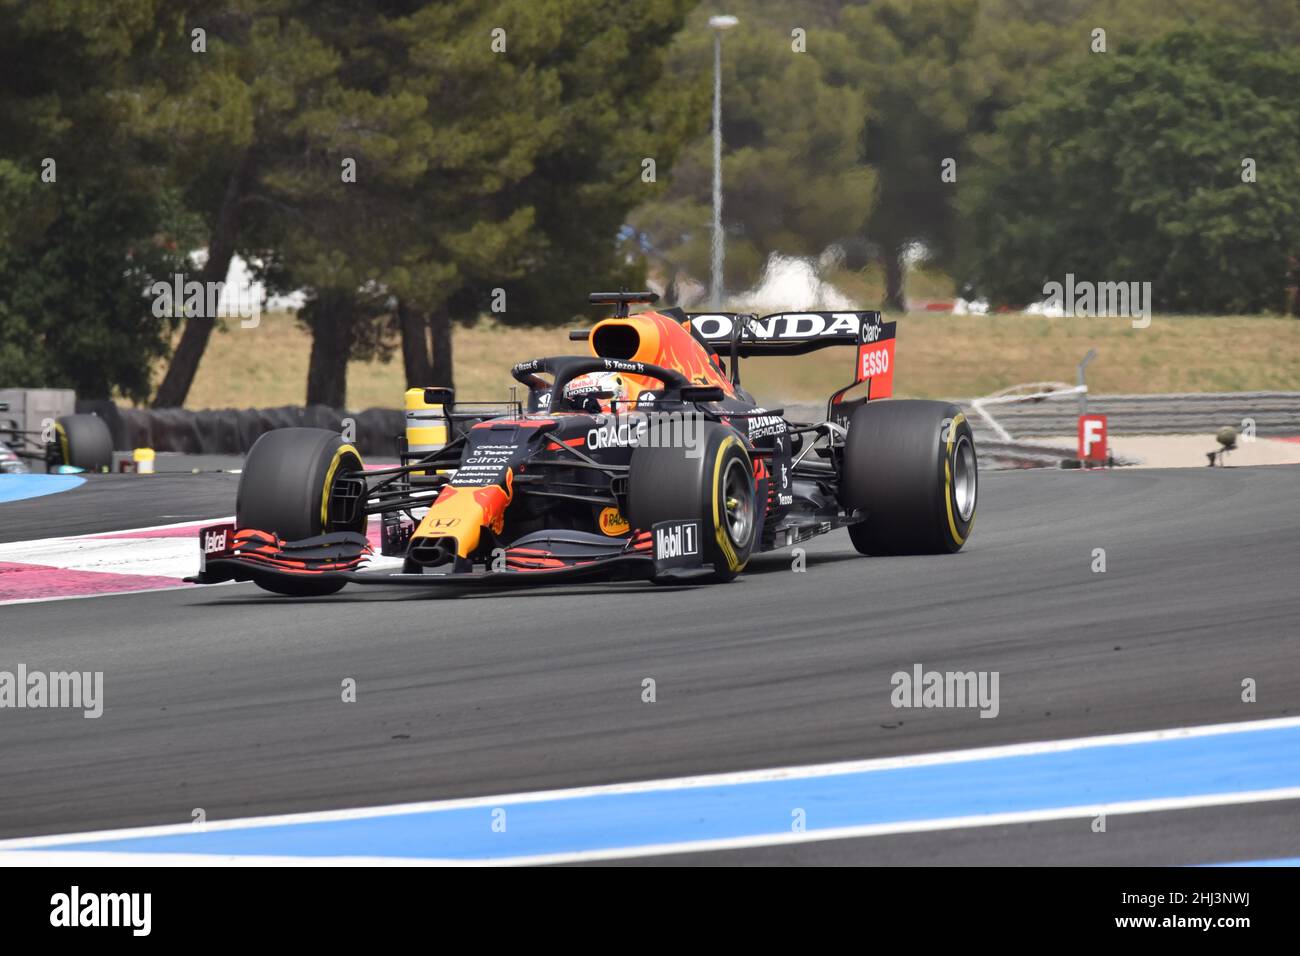 max verstappen attacking first corner of Paul Ricard's circuit Stock Photo